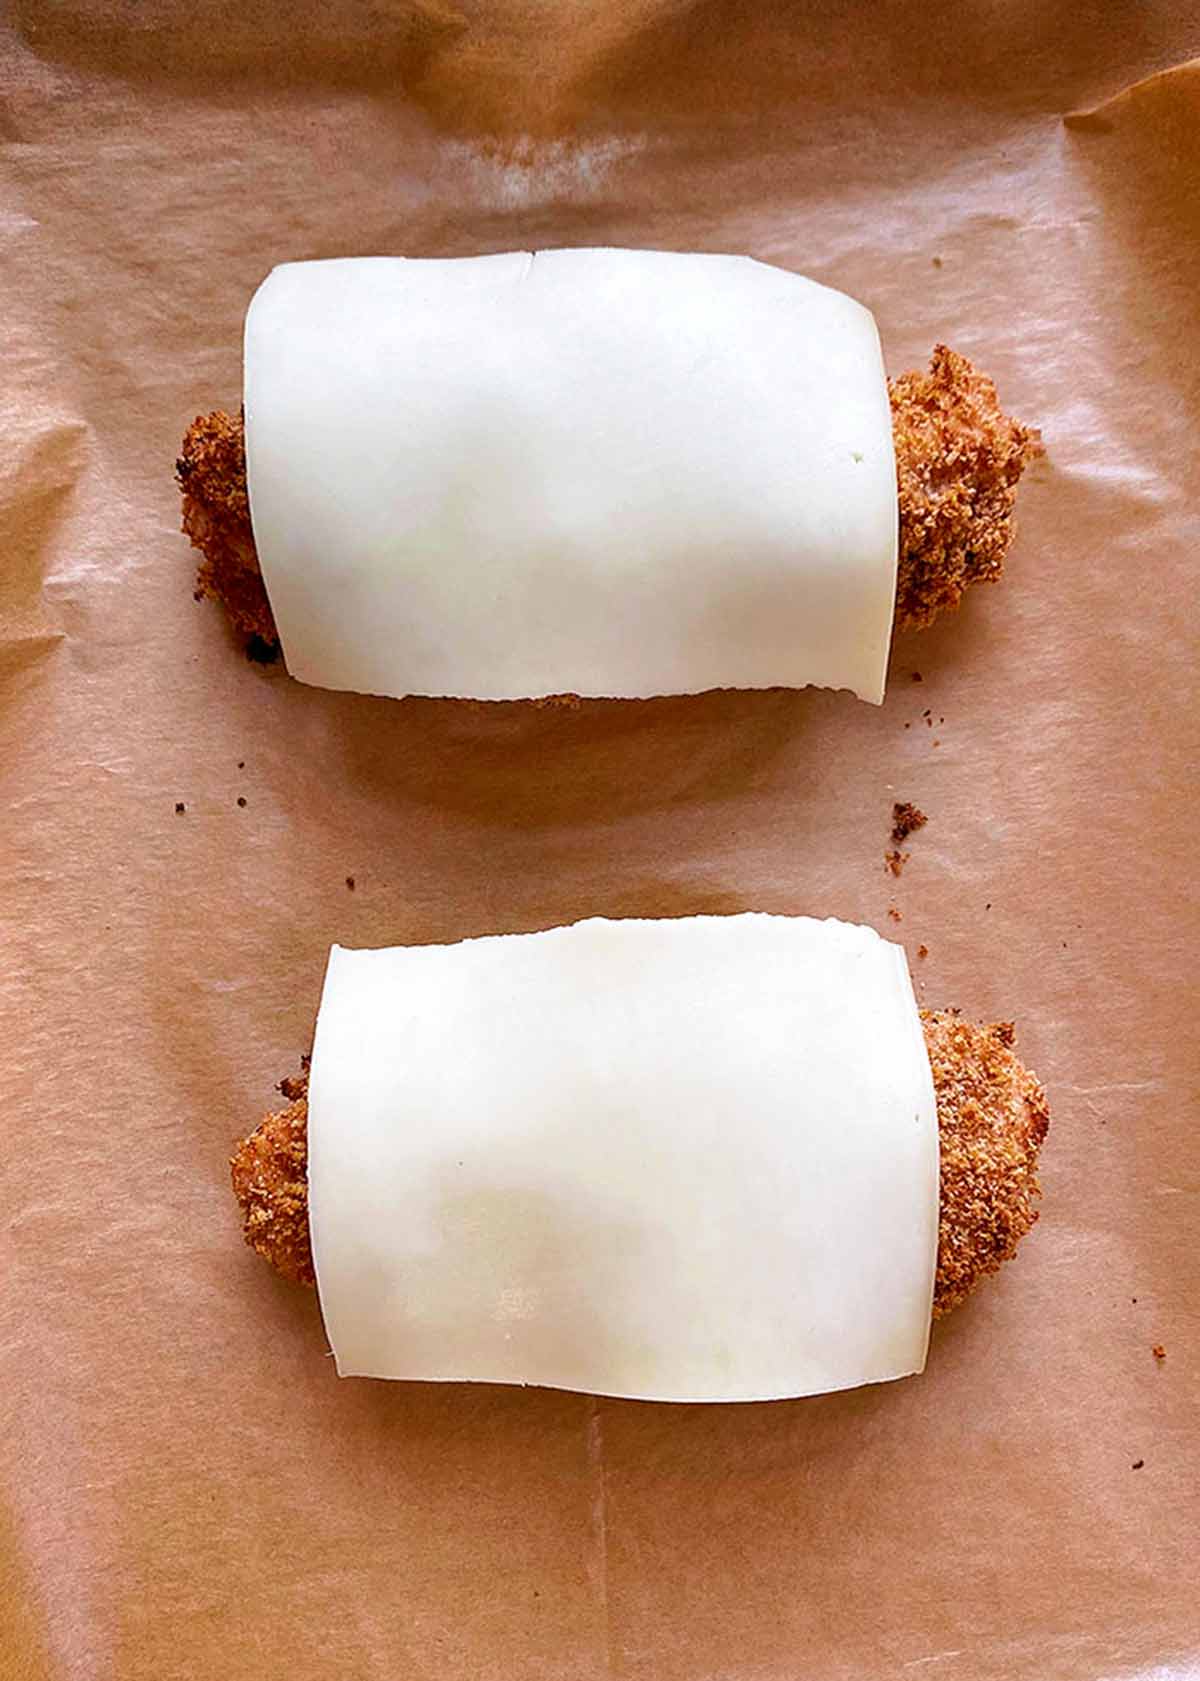 Two breaded chicken breasts with cheese slices on them.